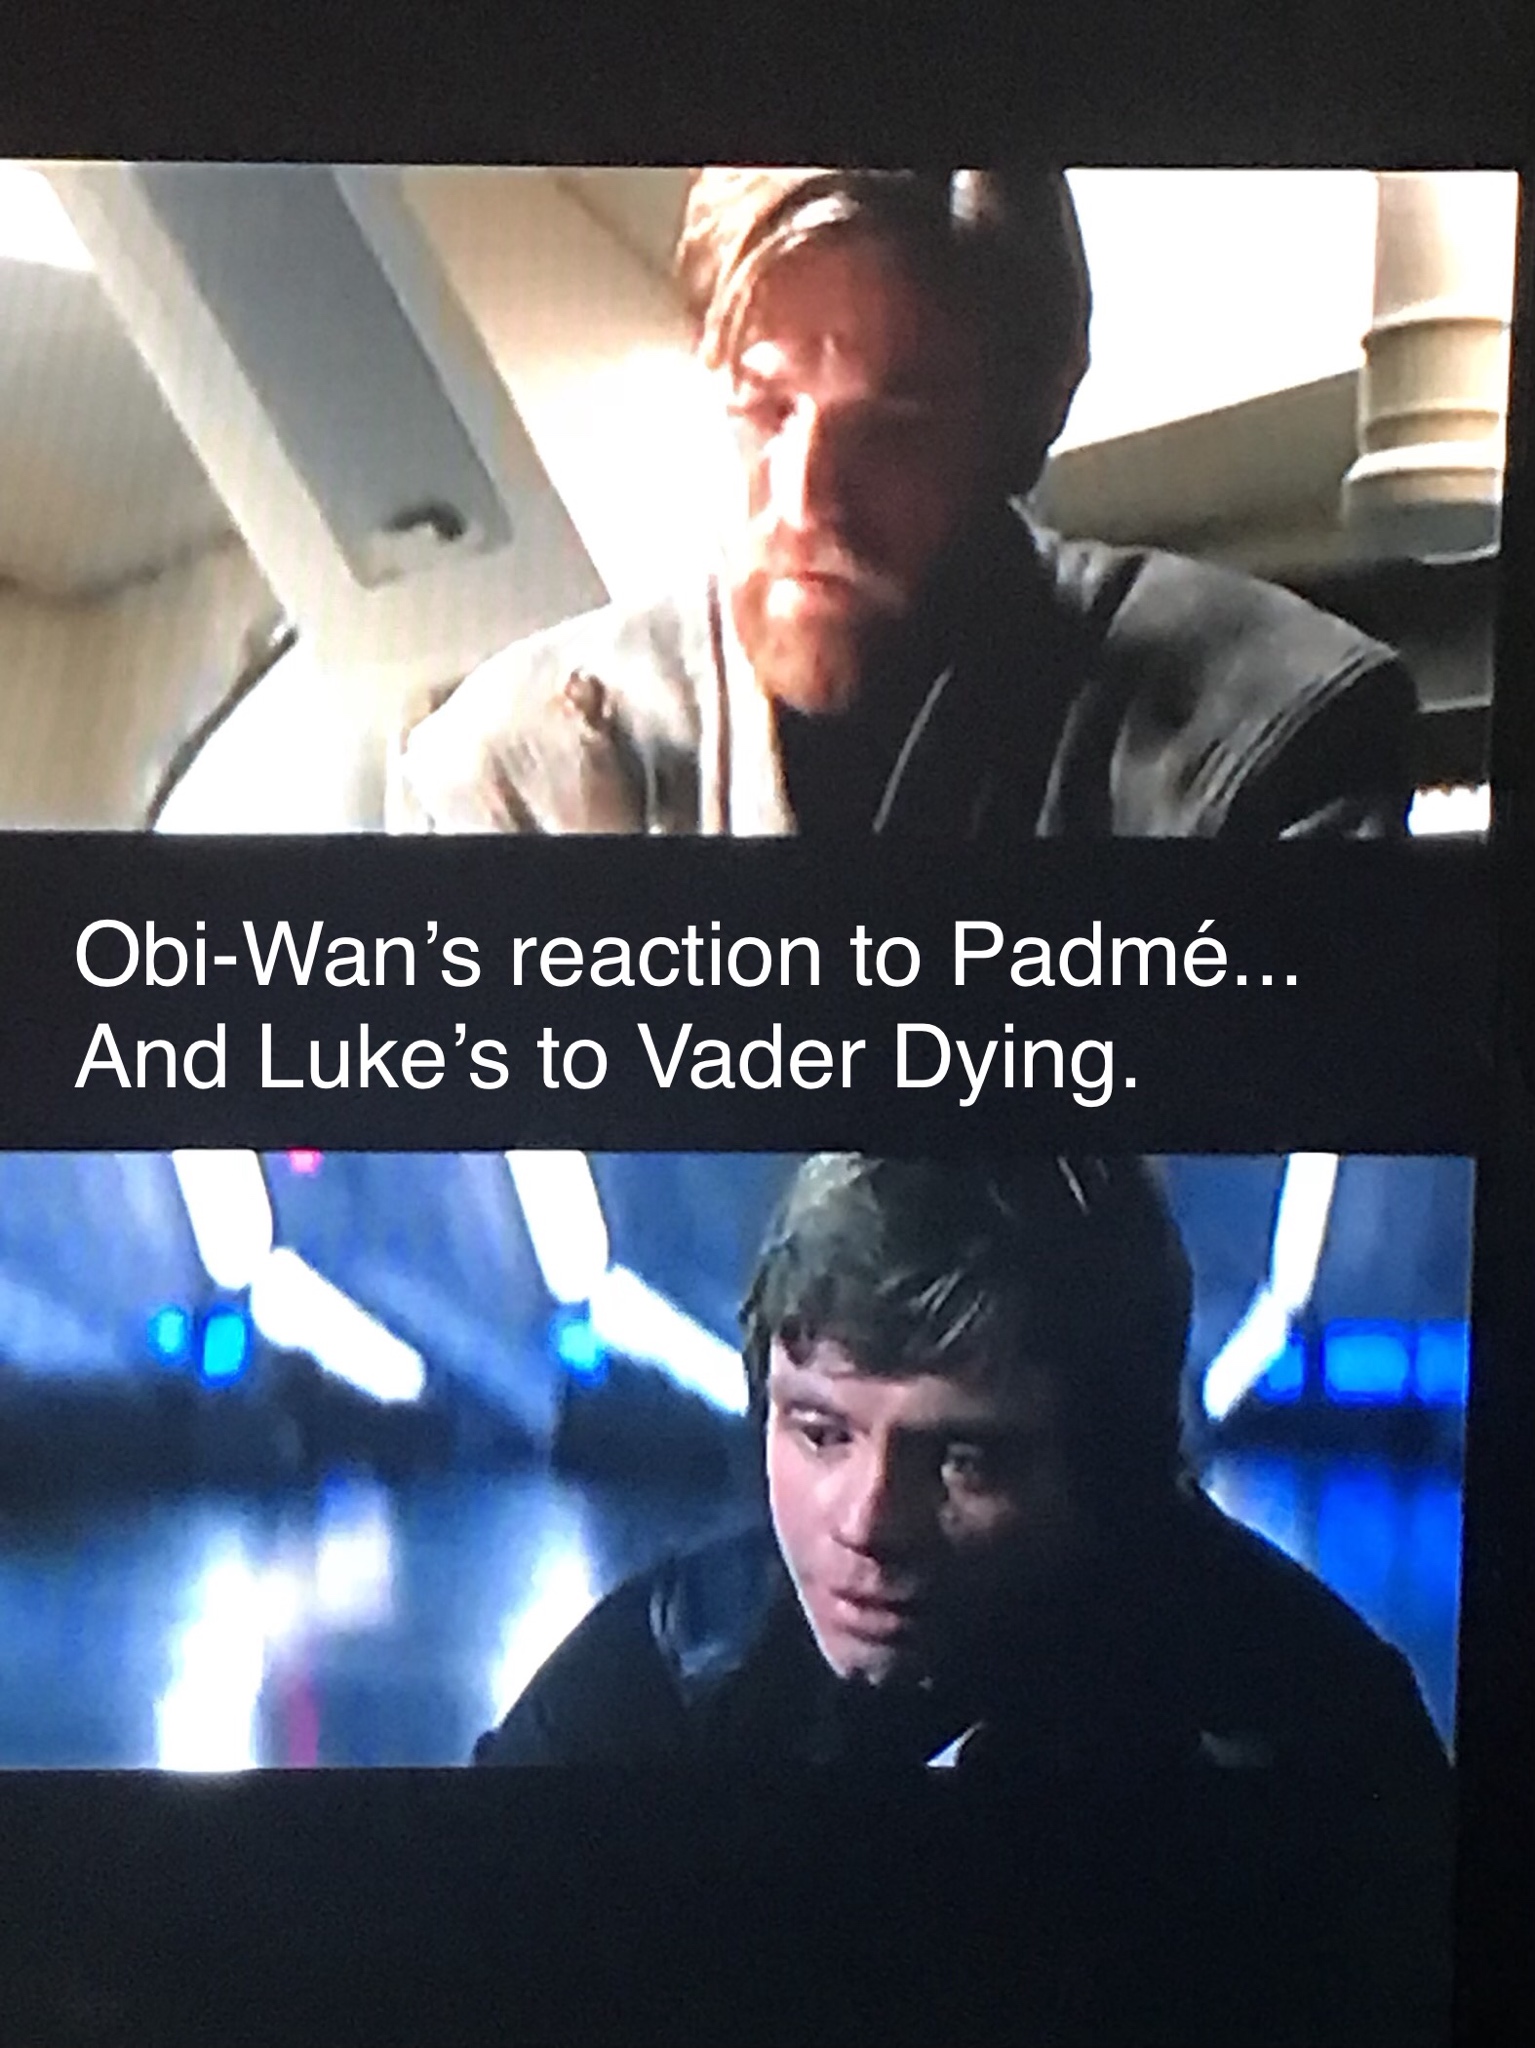 photo caption - ObiWan's reaction to Padm... And Luke's to Vader Dying.